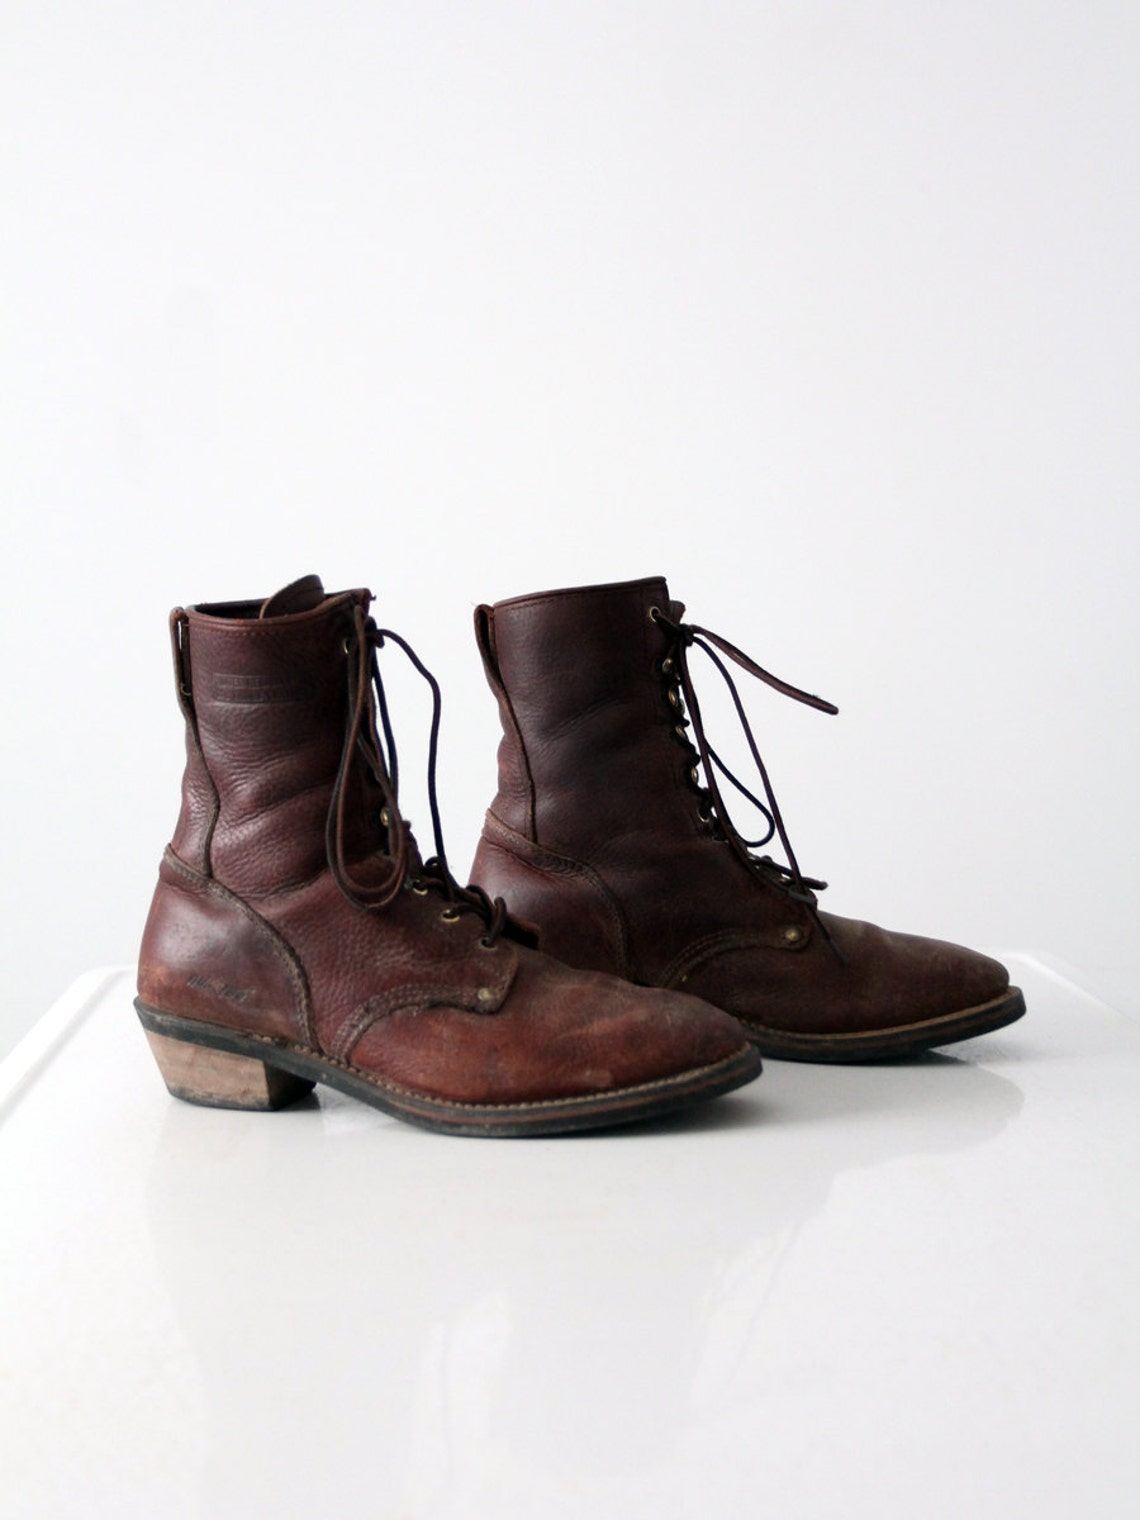 Vintage Lace up Work Boots, Men's Leather Boots, Size 10 - Etsy